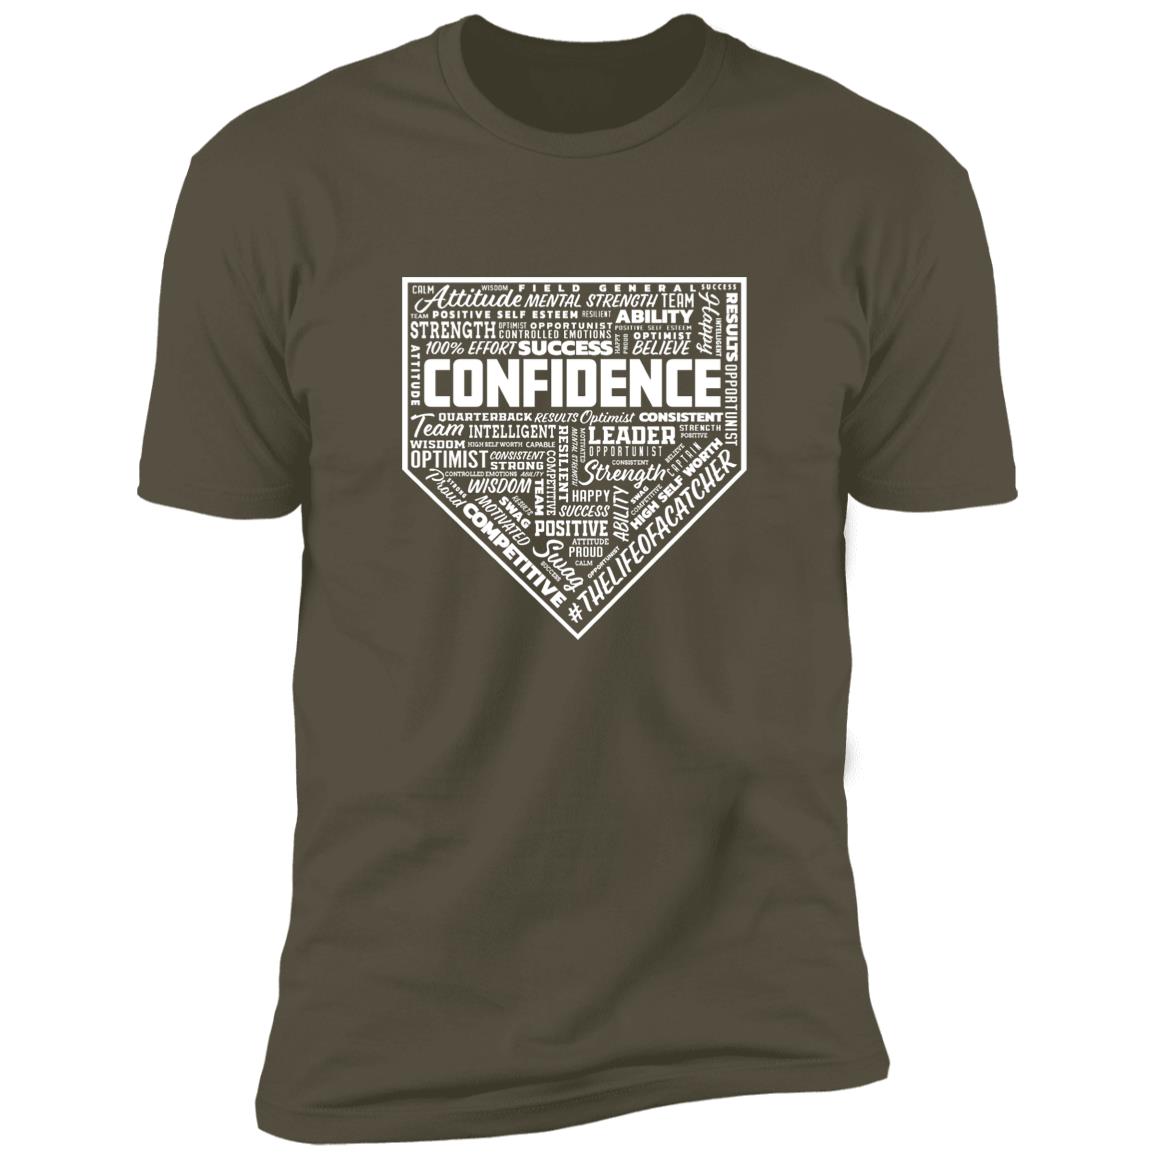 the catching guy confidence t-shirt mockup in army